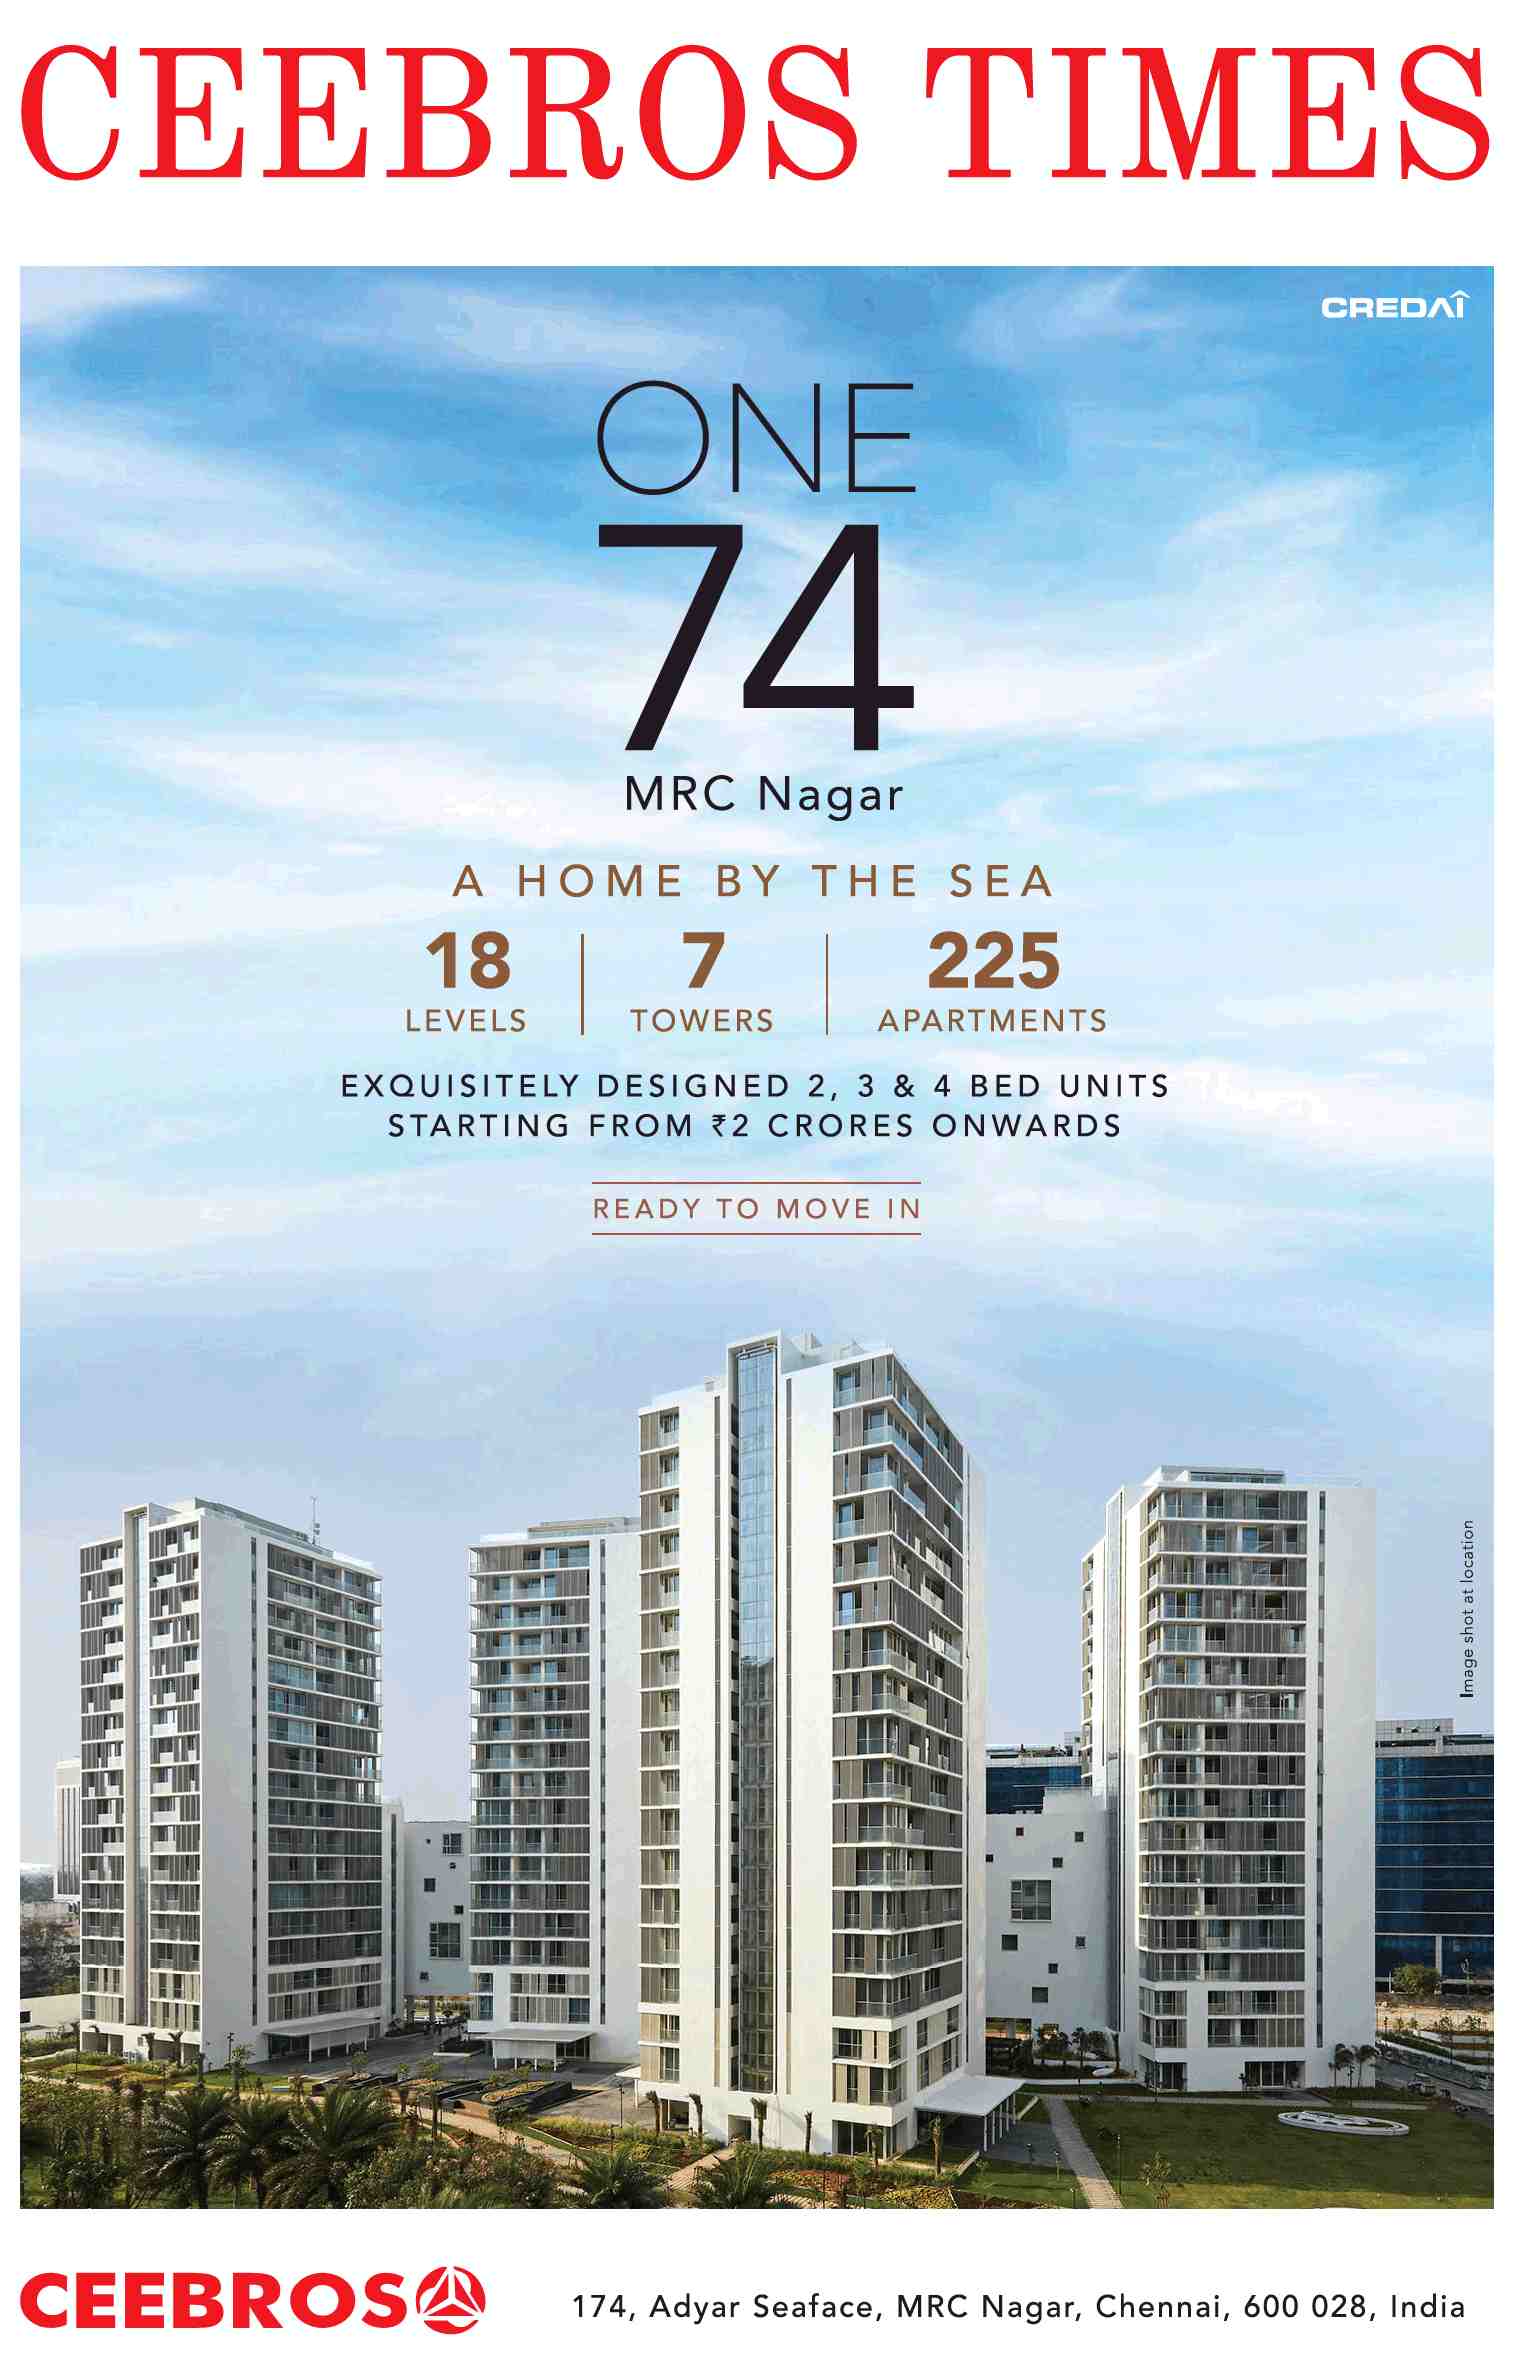 Book a home by the sea at Ceebros One 74 in Chennai Update